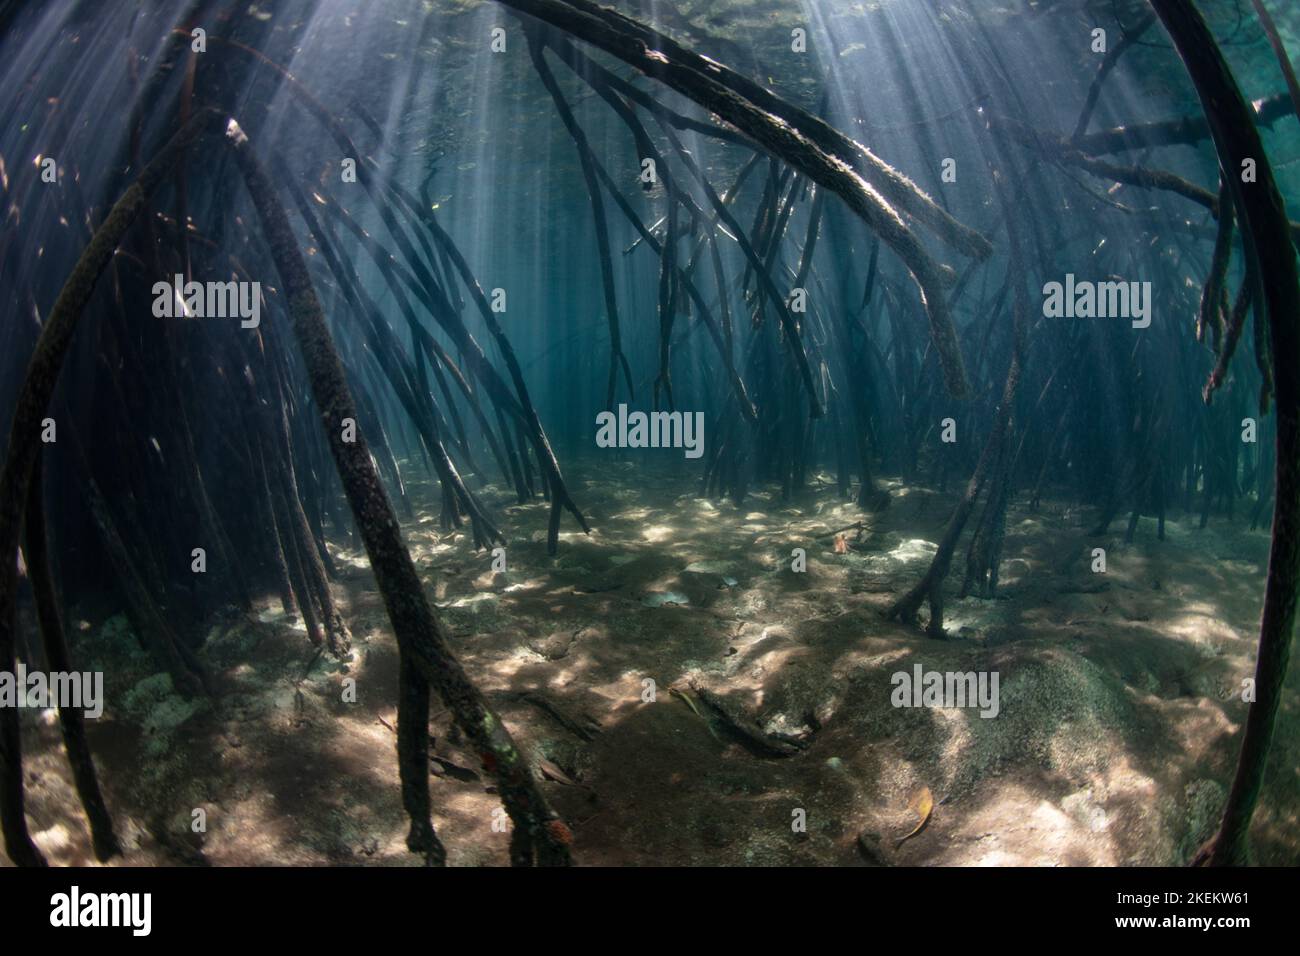 Red mangrove roots descend into shadowed water in a healthy Indonesian mangrove forest. Mangroves provide important habitat for many aquatic species. Stock Photo